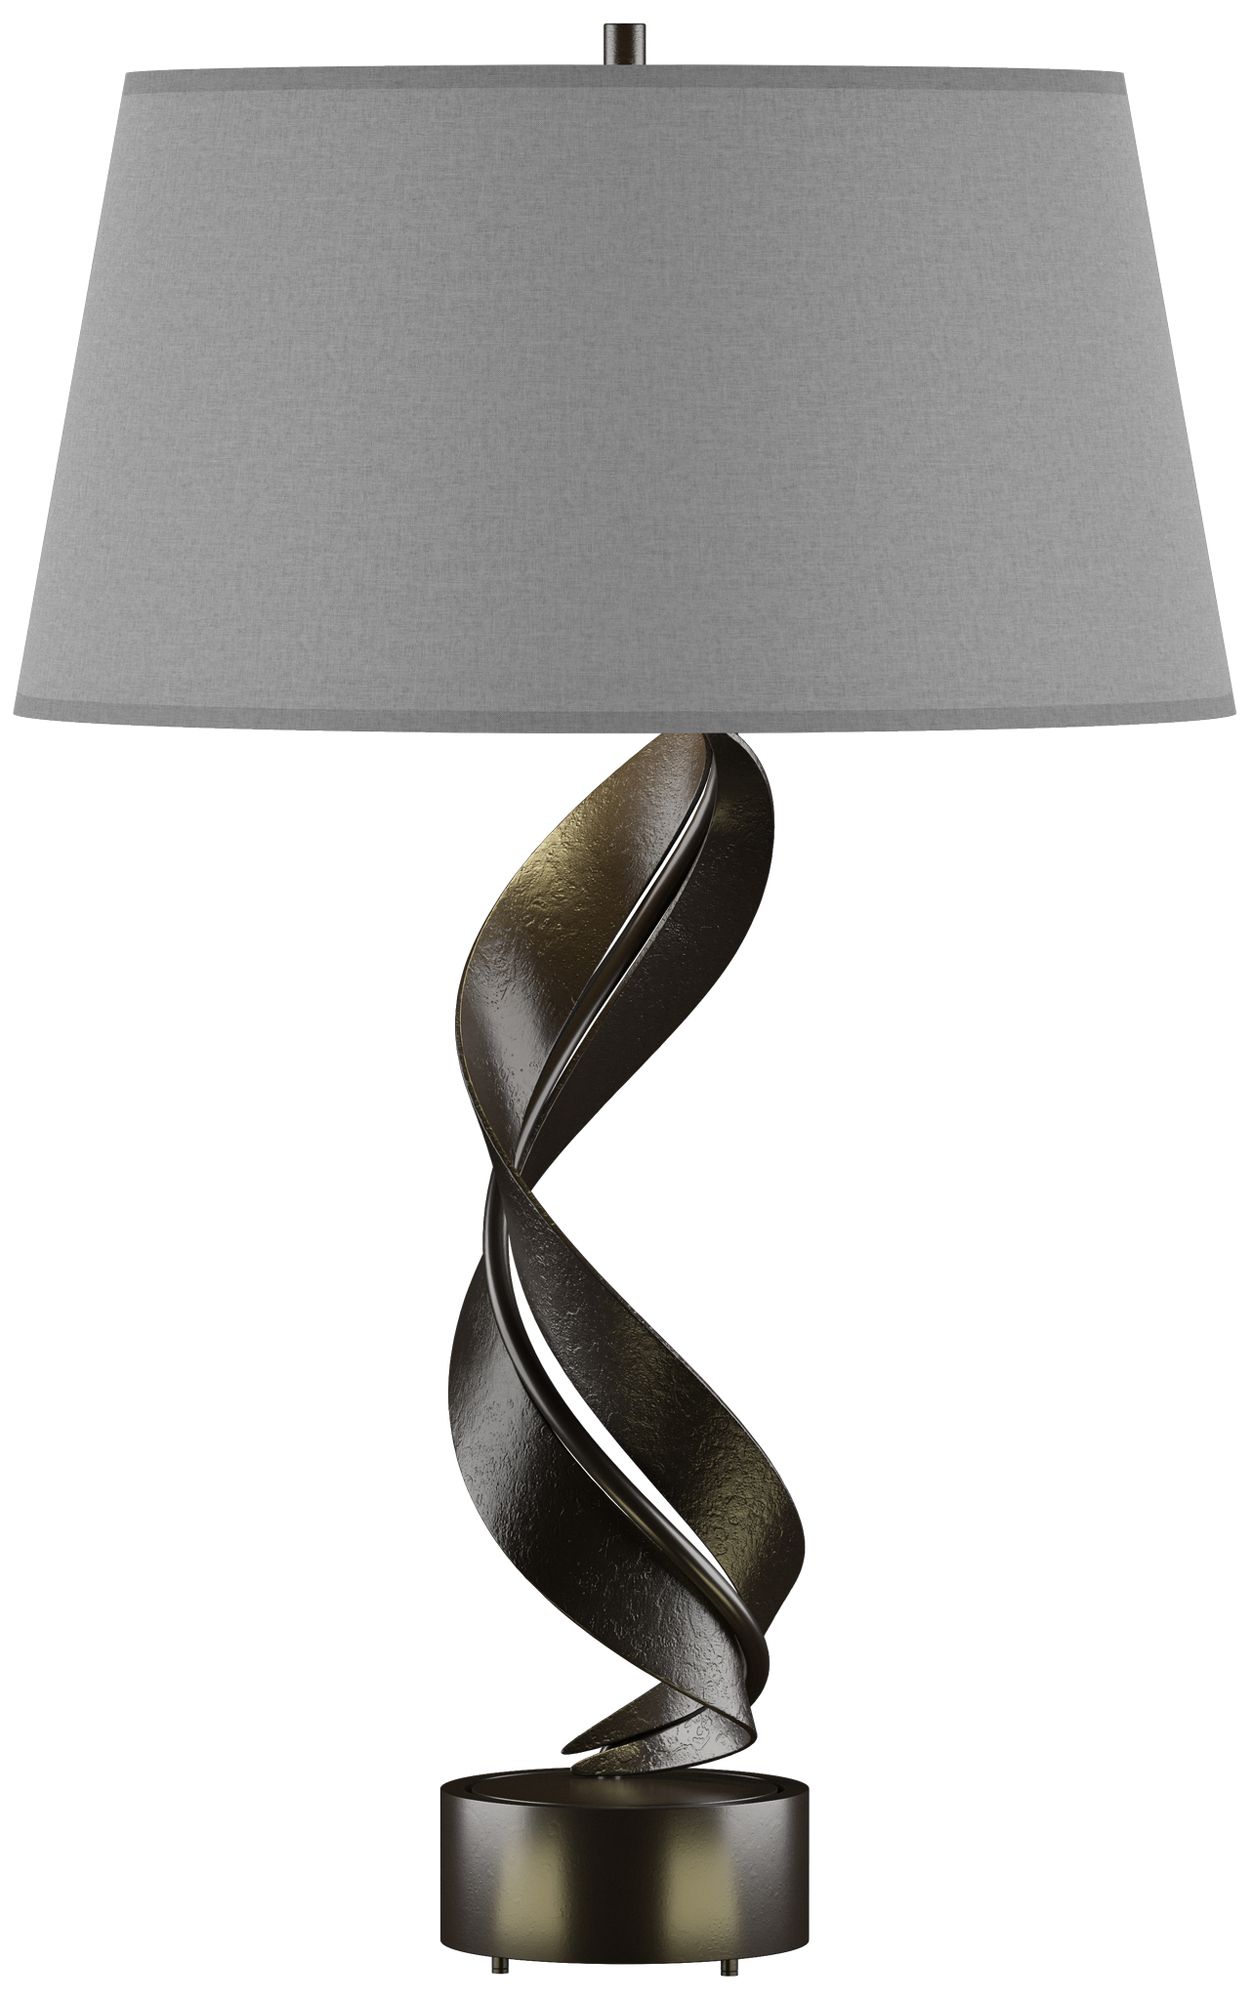 Folio 25.1" High Oil Rubbed Bronze Table Lamp With Medium Grey Shade